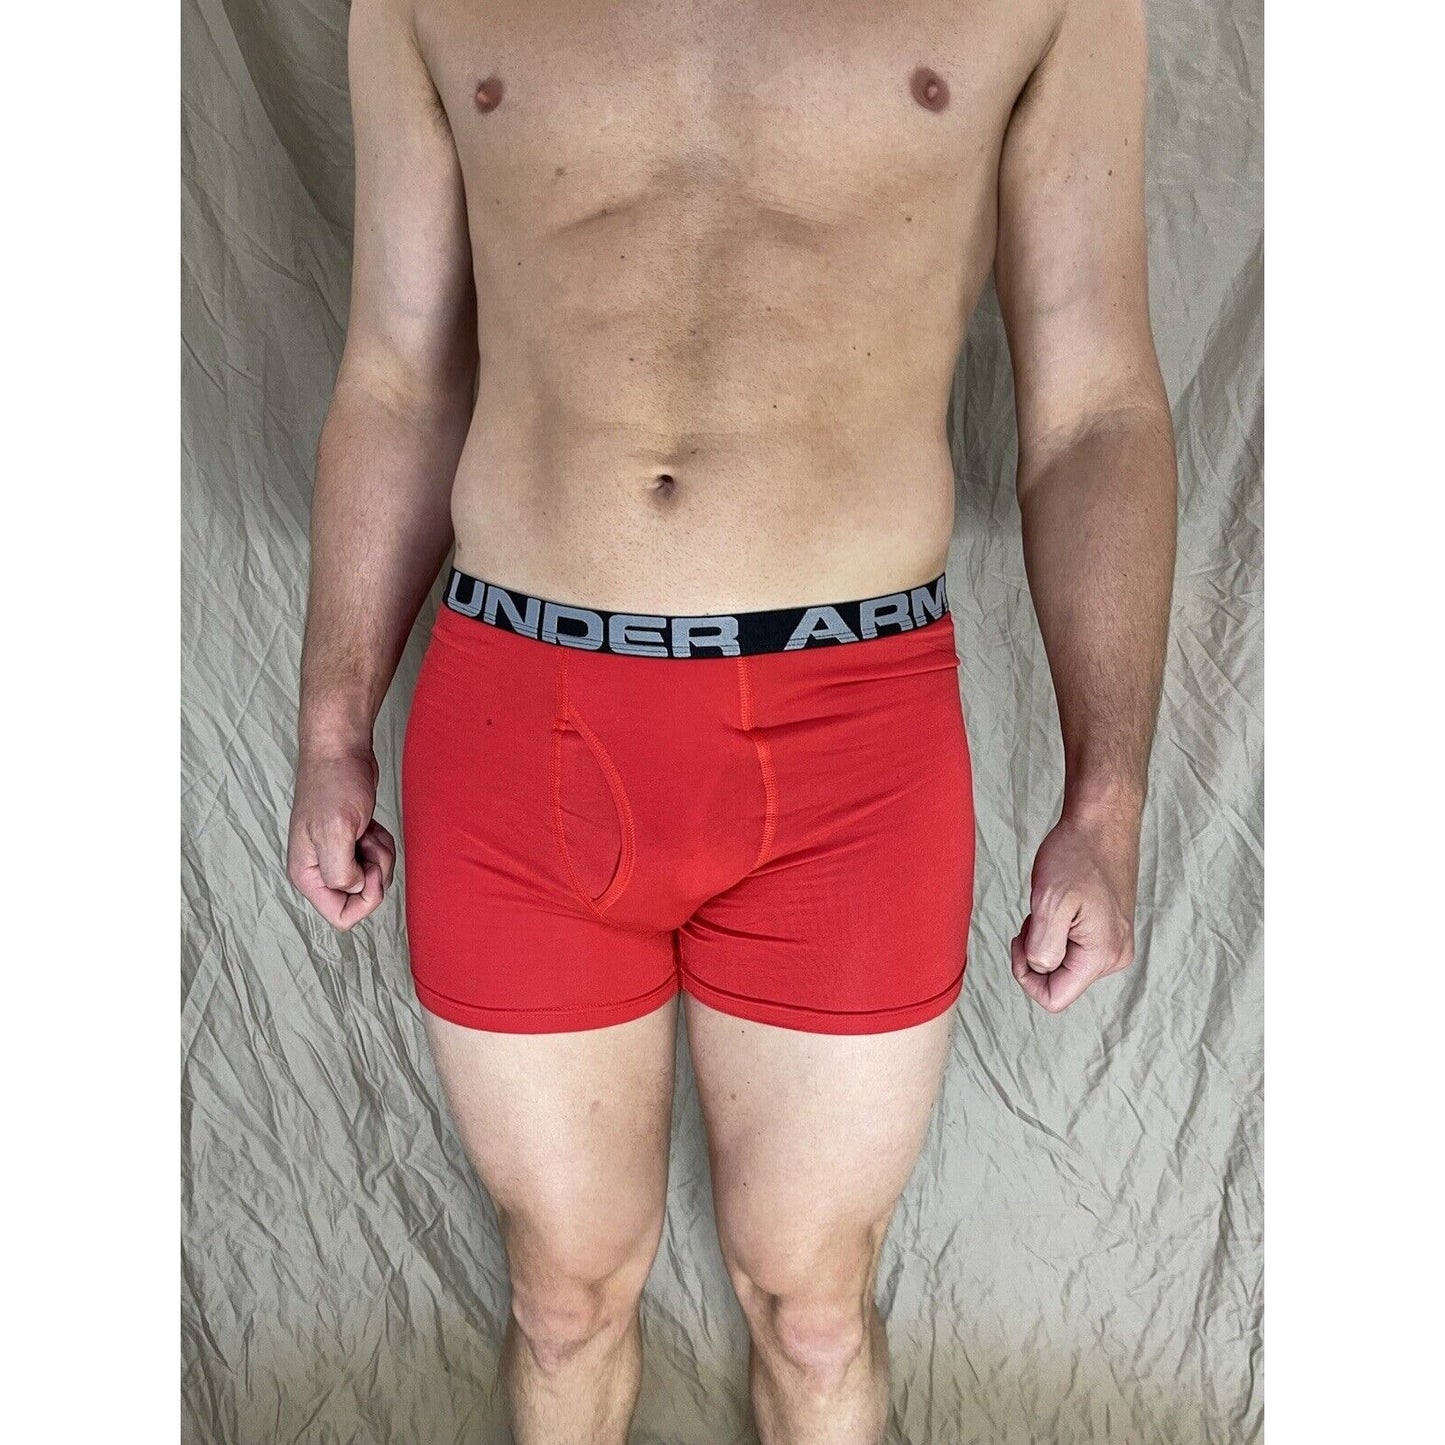 youth XL Red under armour fitted heat gear boxer briefs